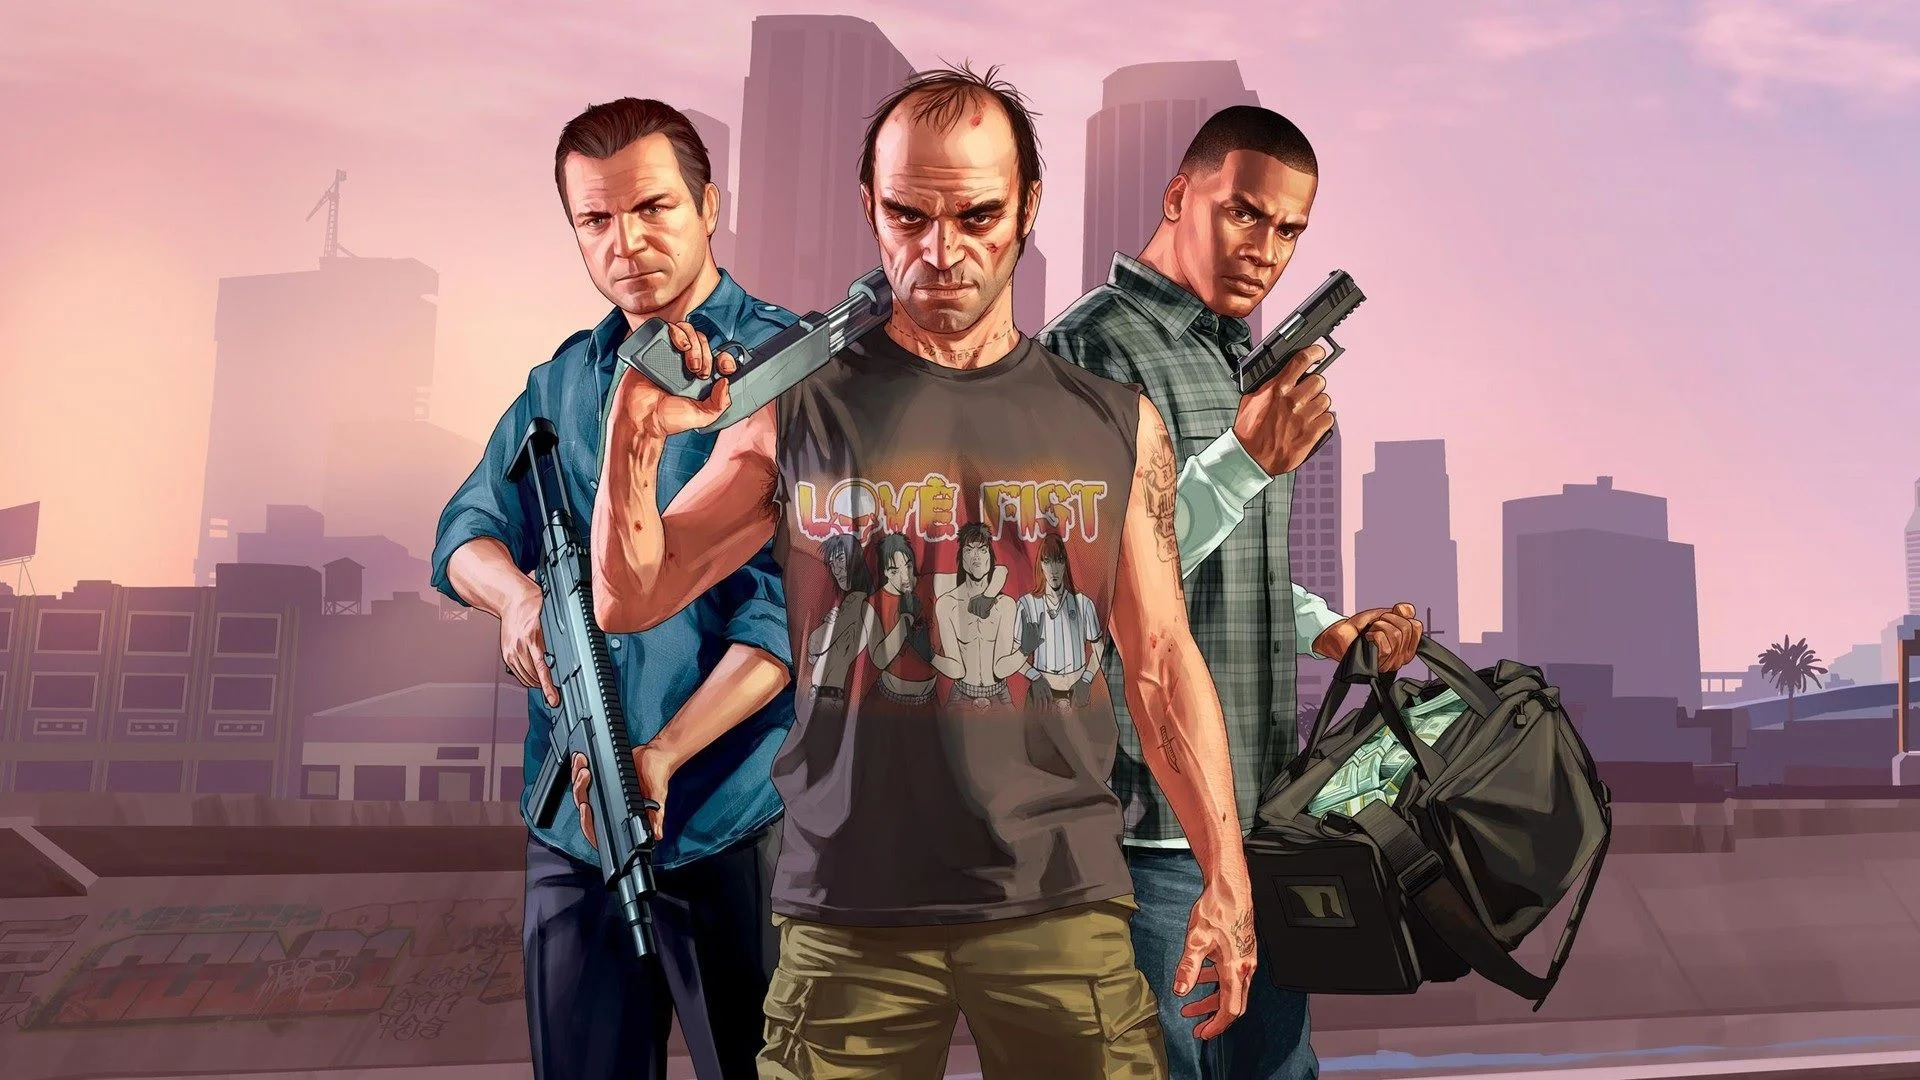 In honor of the 10th anniversary of GTA V, the developers have released new content for GTA Online